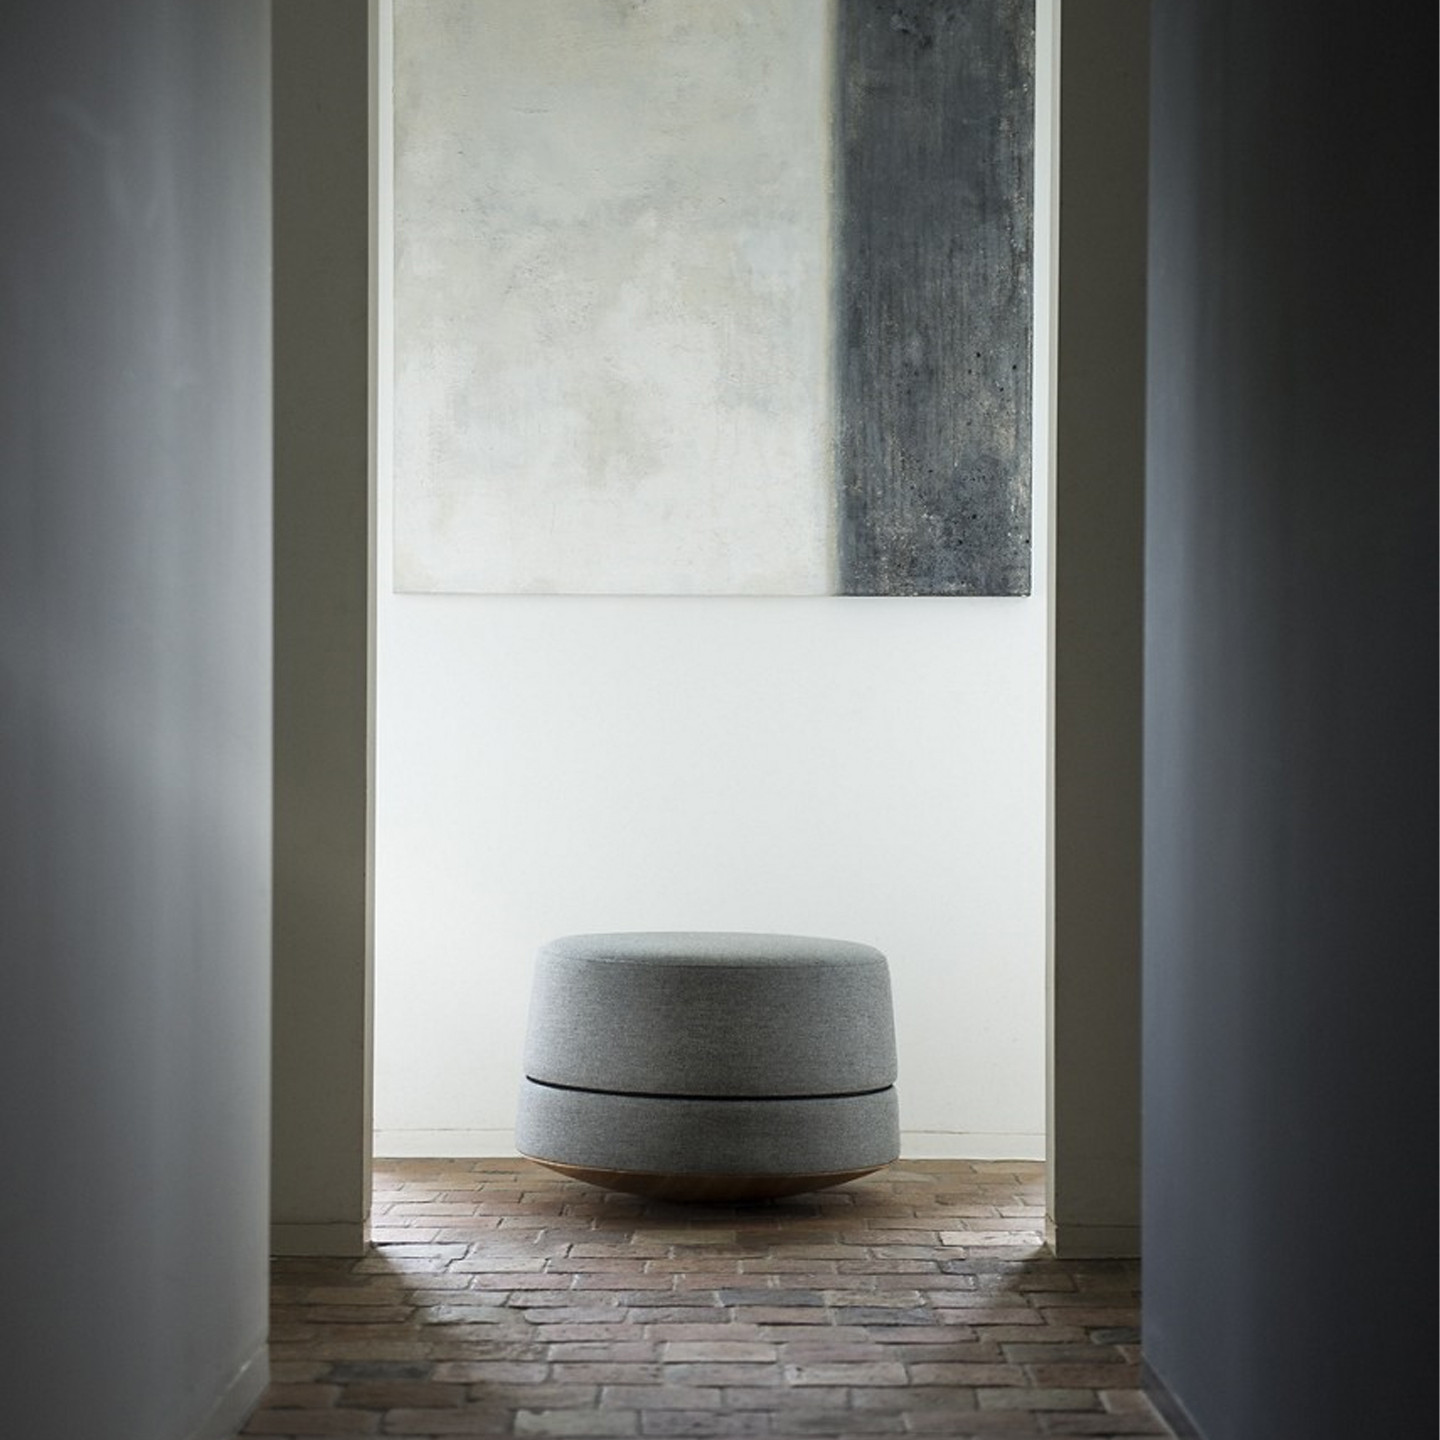 Haworth Buzzibalance pouf in grey color amidst grey pillars and a white wall